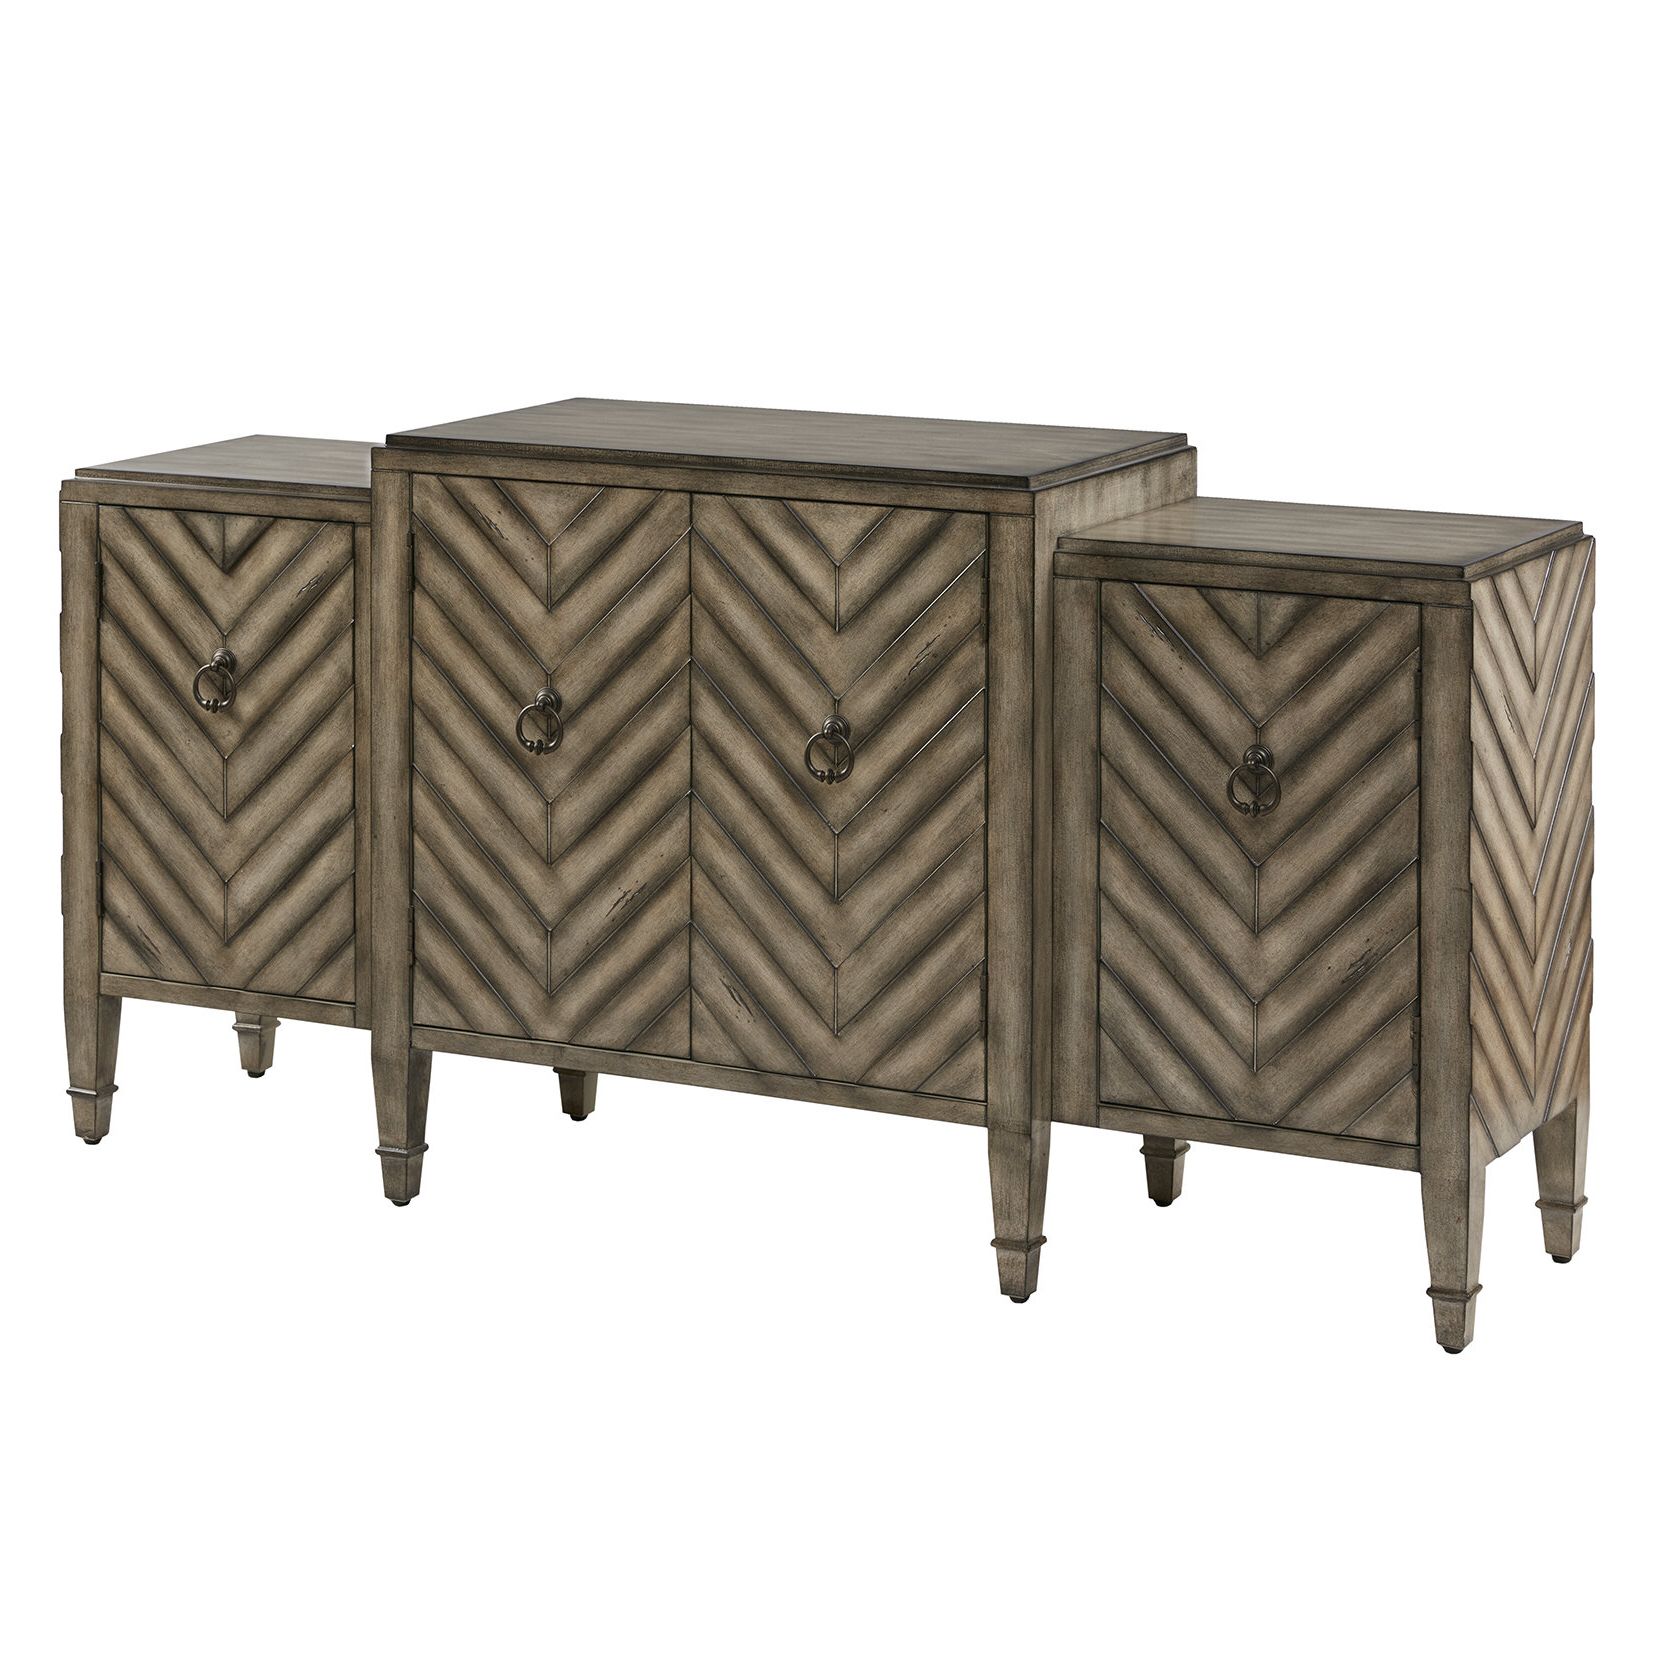 Harshman Buffet Table With Contemporary Wooden Buffets With Four Open Compartments And Metal Tapered Legs (View 4 of 20)